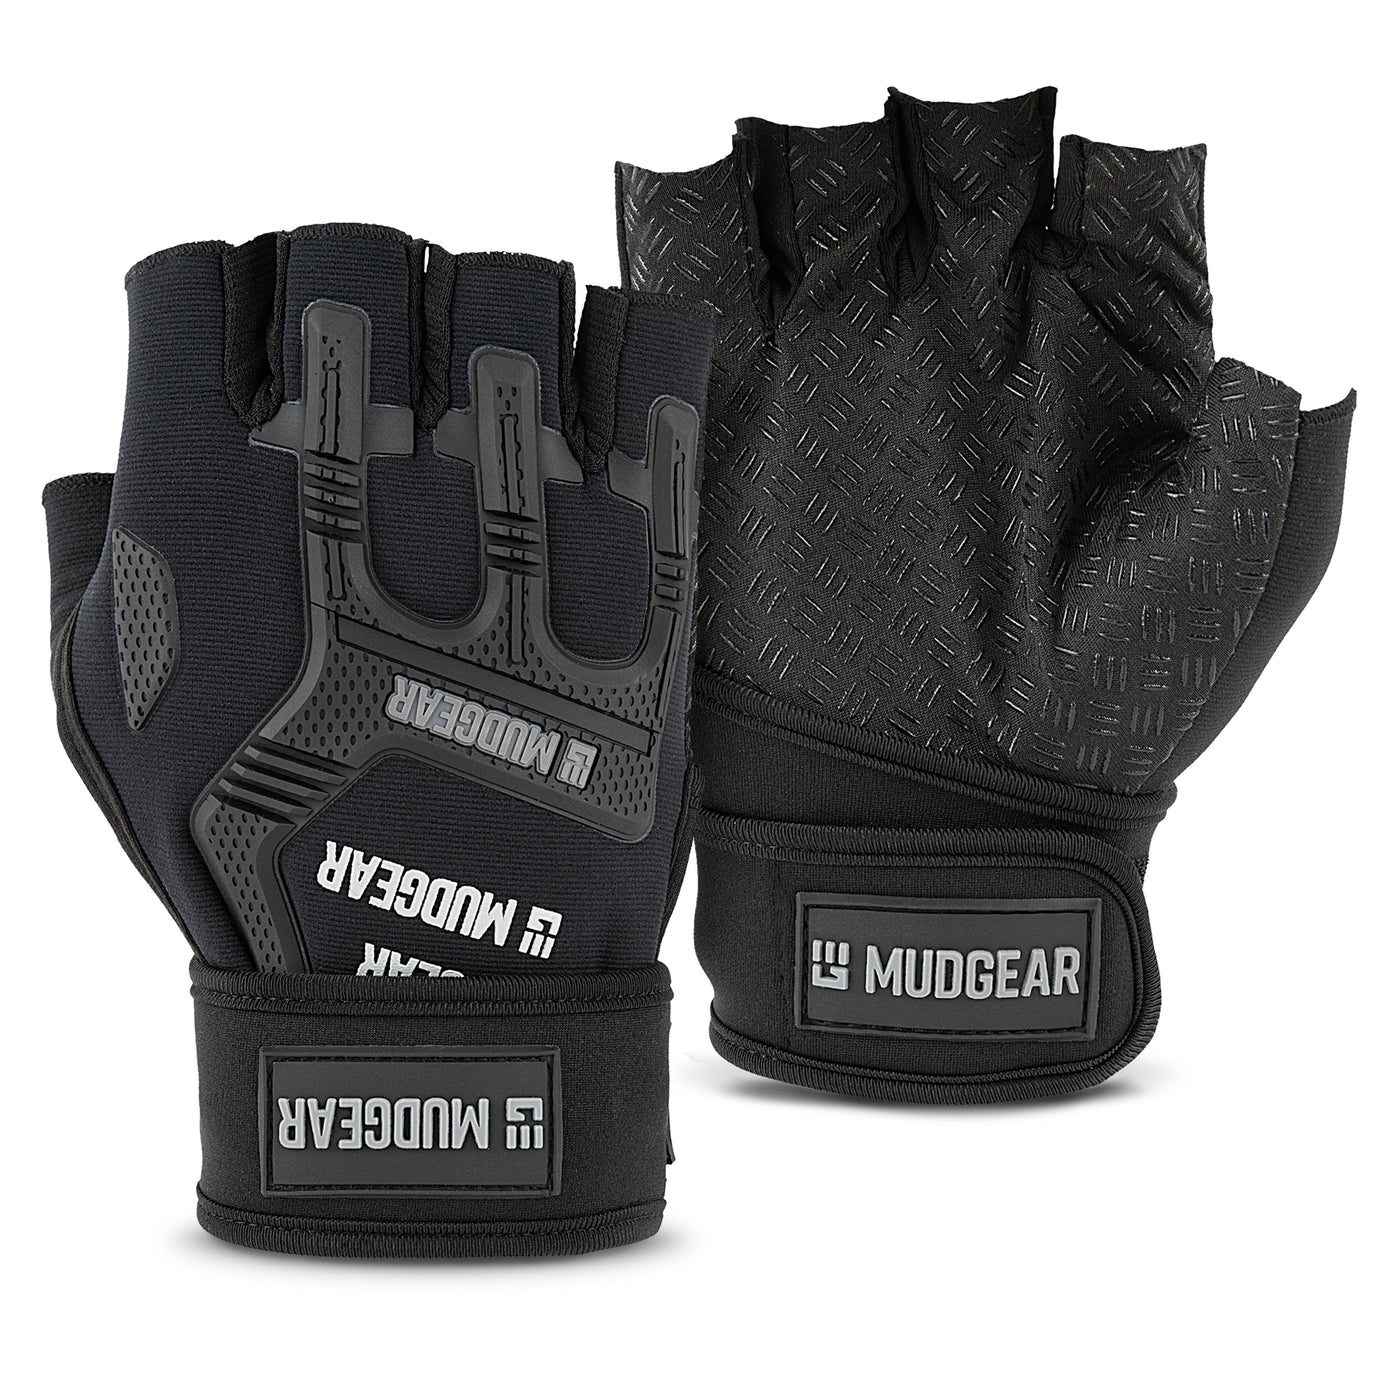 Fit Four OCR Neo Grip Gloves Obstacle Course Racing & Mud Run Hand Protection (Gray, Small)